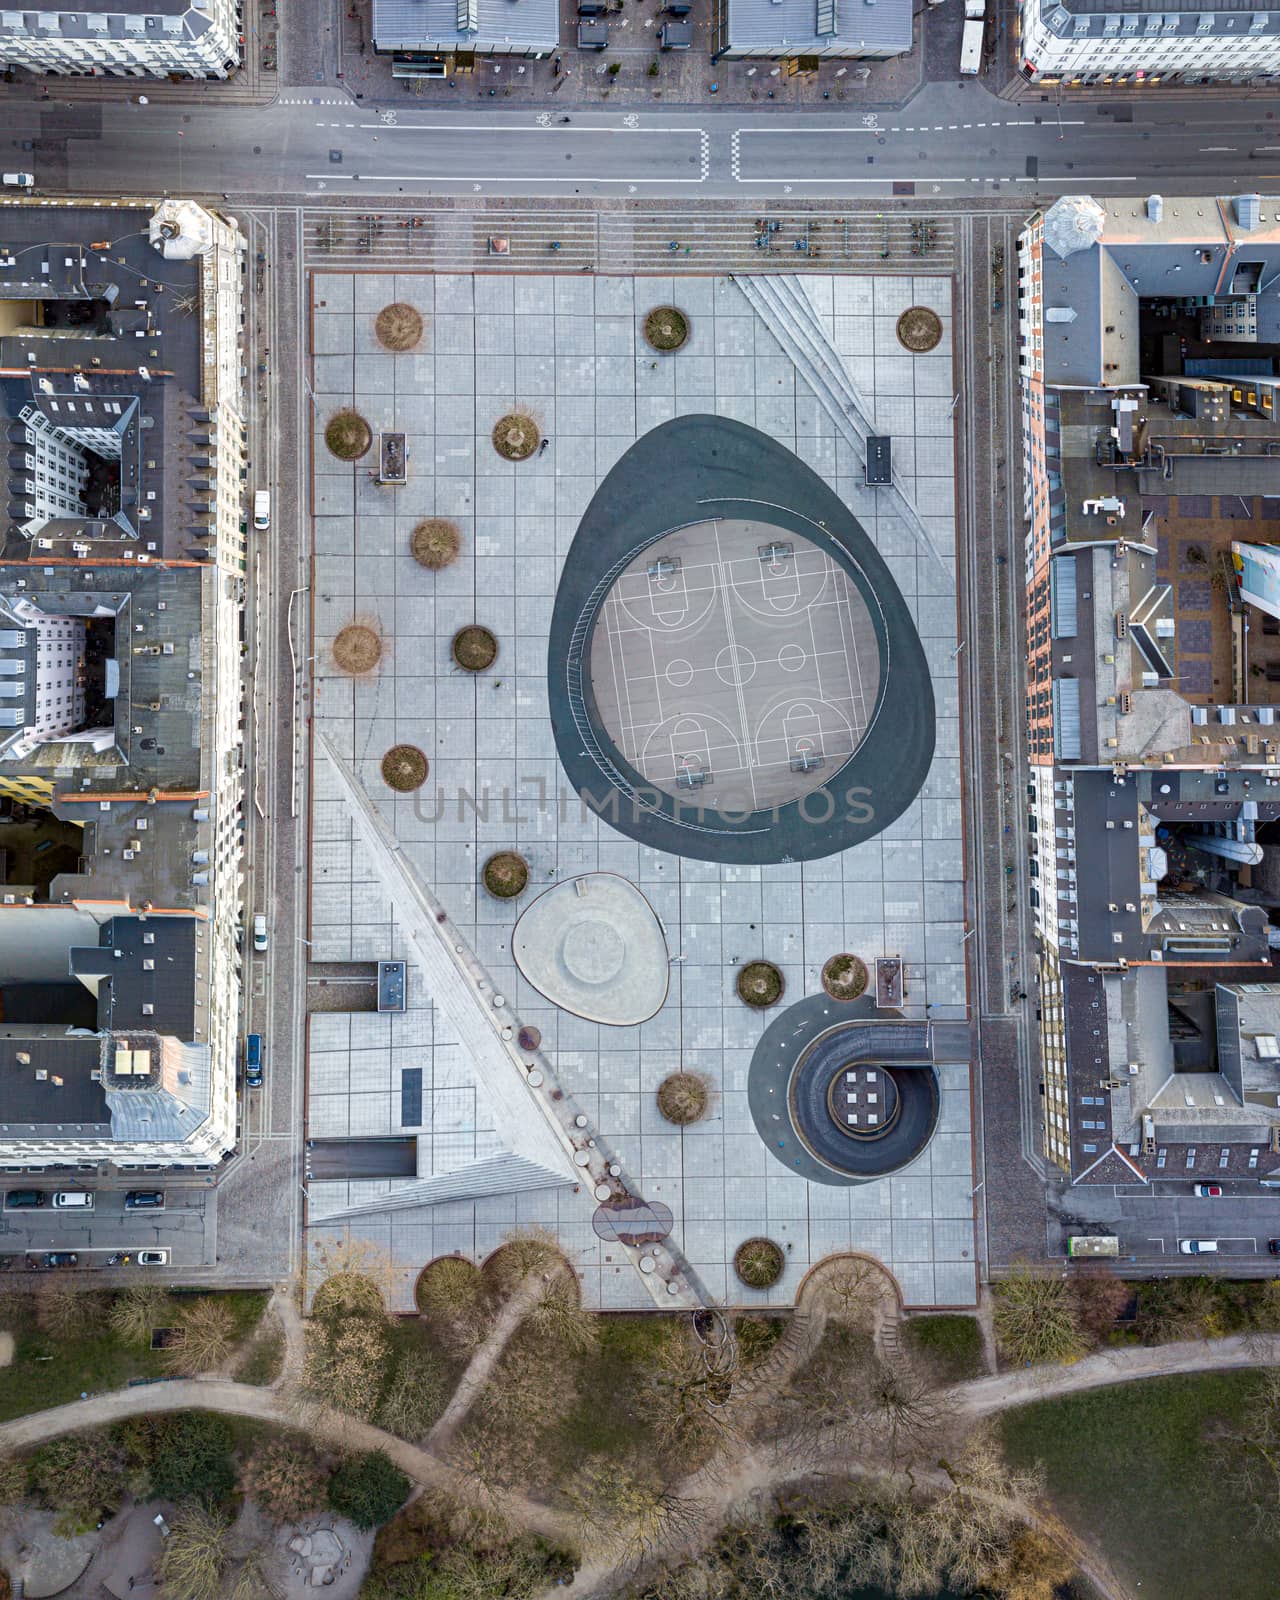 Copenhagen, Denmark - March 31, 2020: Aerial drone view Israels Plads and the market halls.